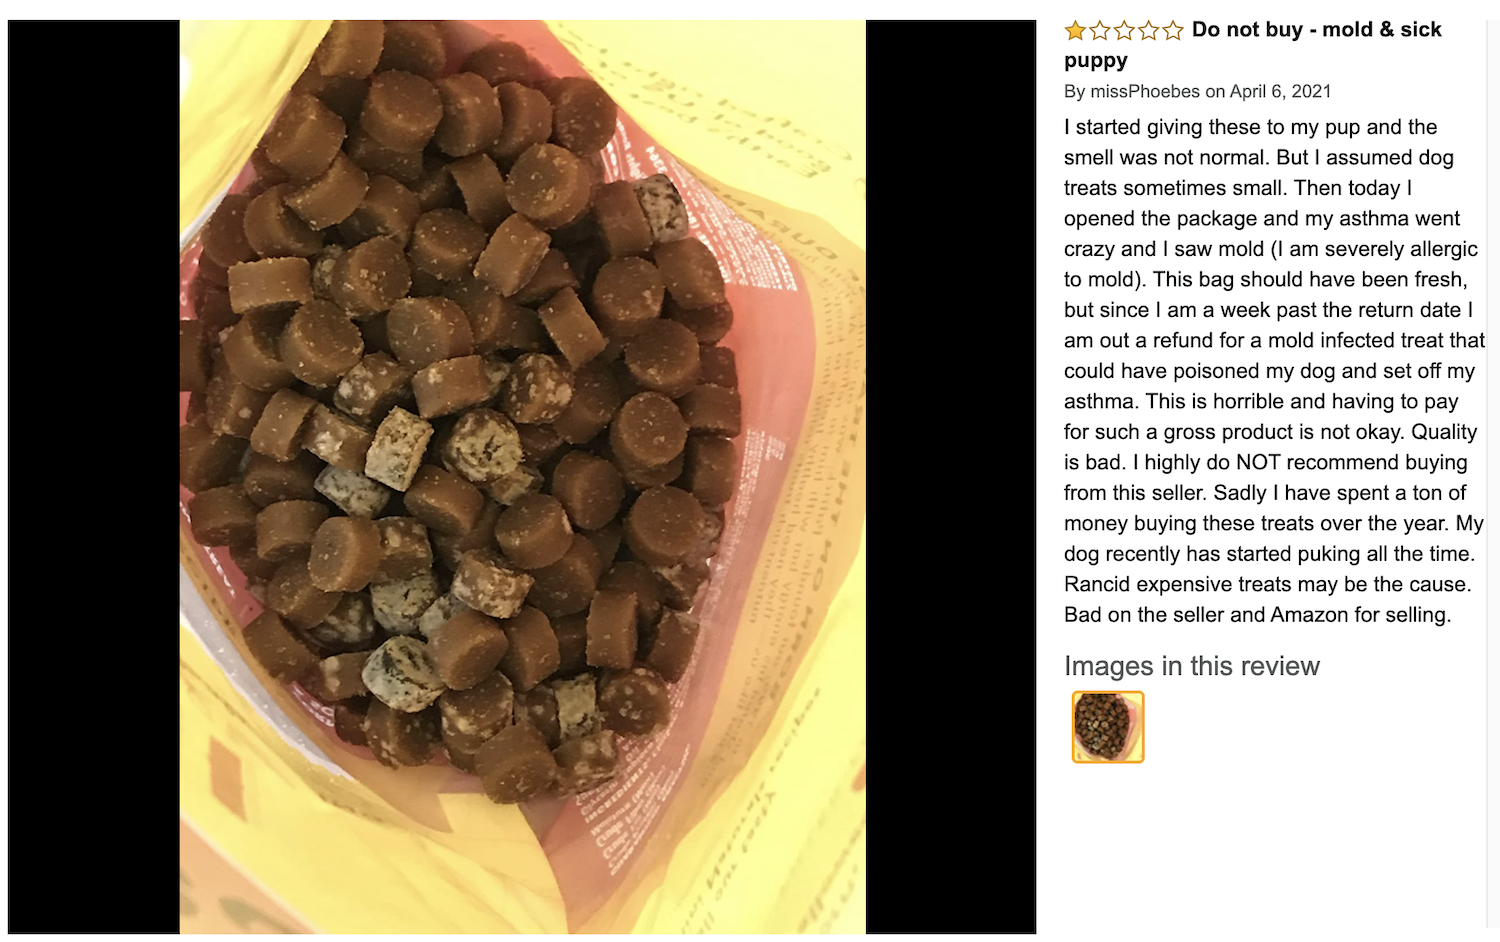 Another photo of mold in a bag of dog treats by Zuke's